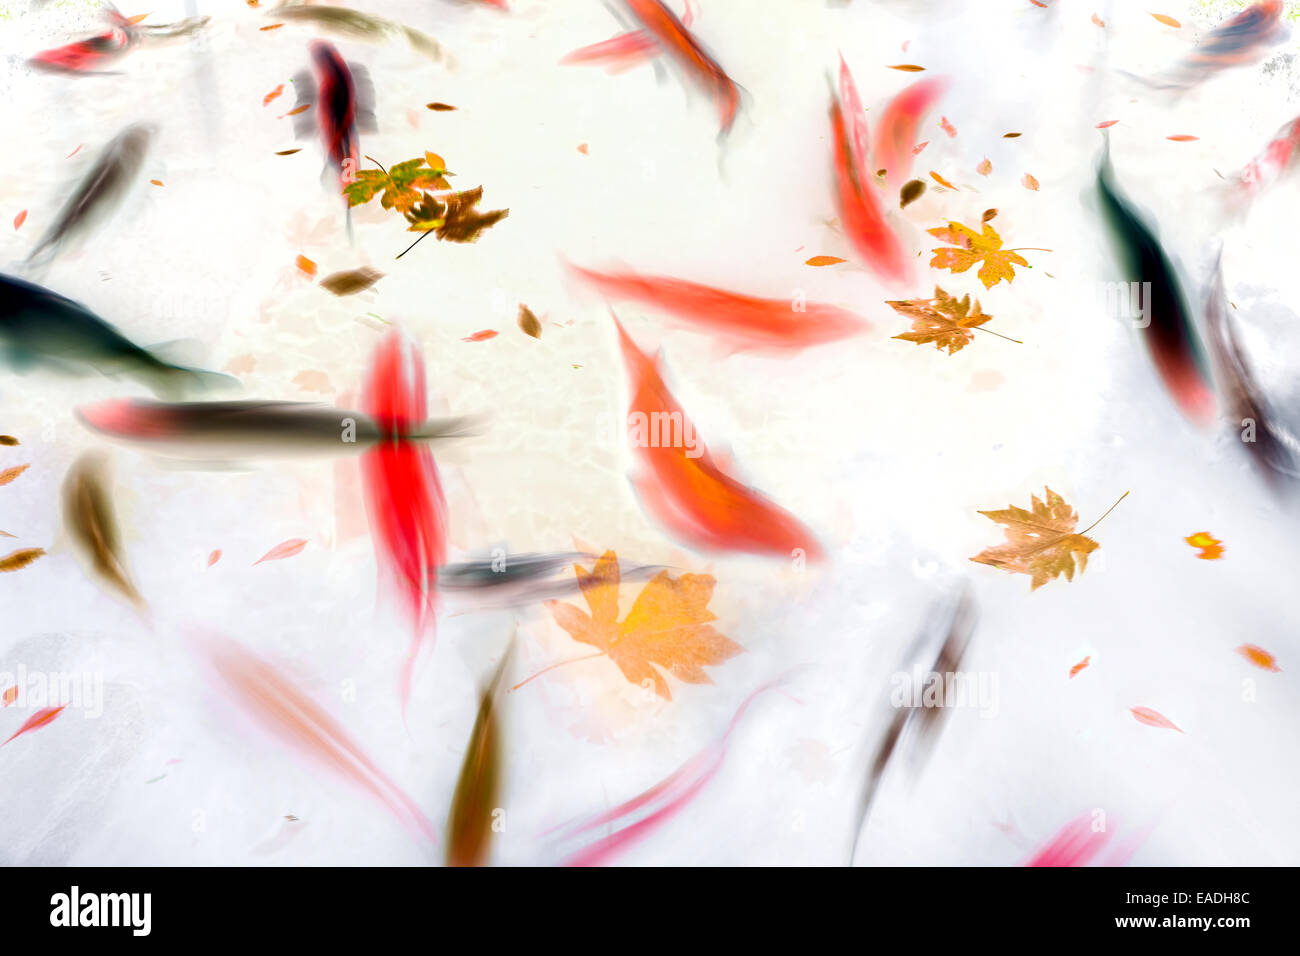 Koi Fish Swimming in Pond with Fall Leaves Abstract Watercolor Illustration Stock Photo